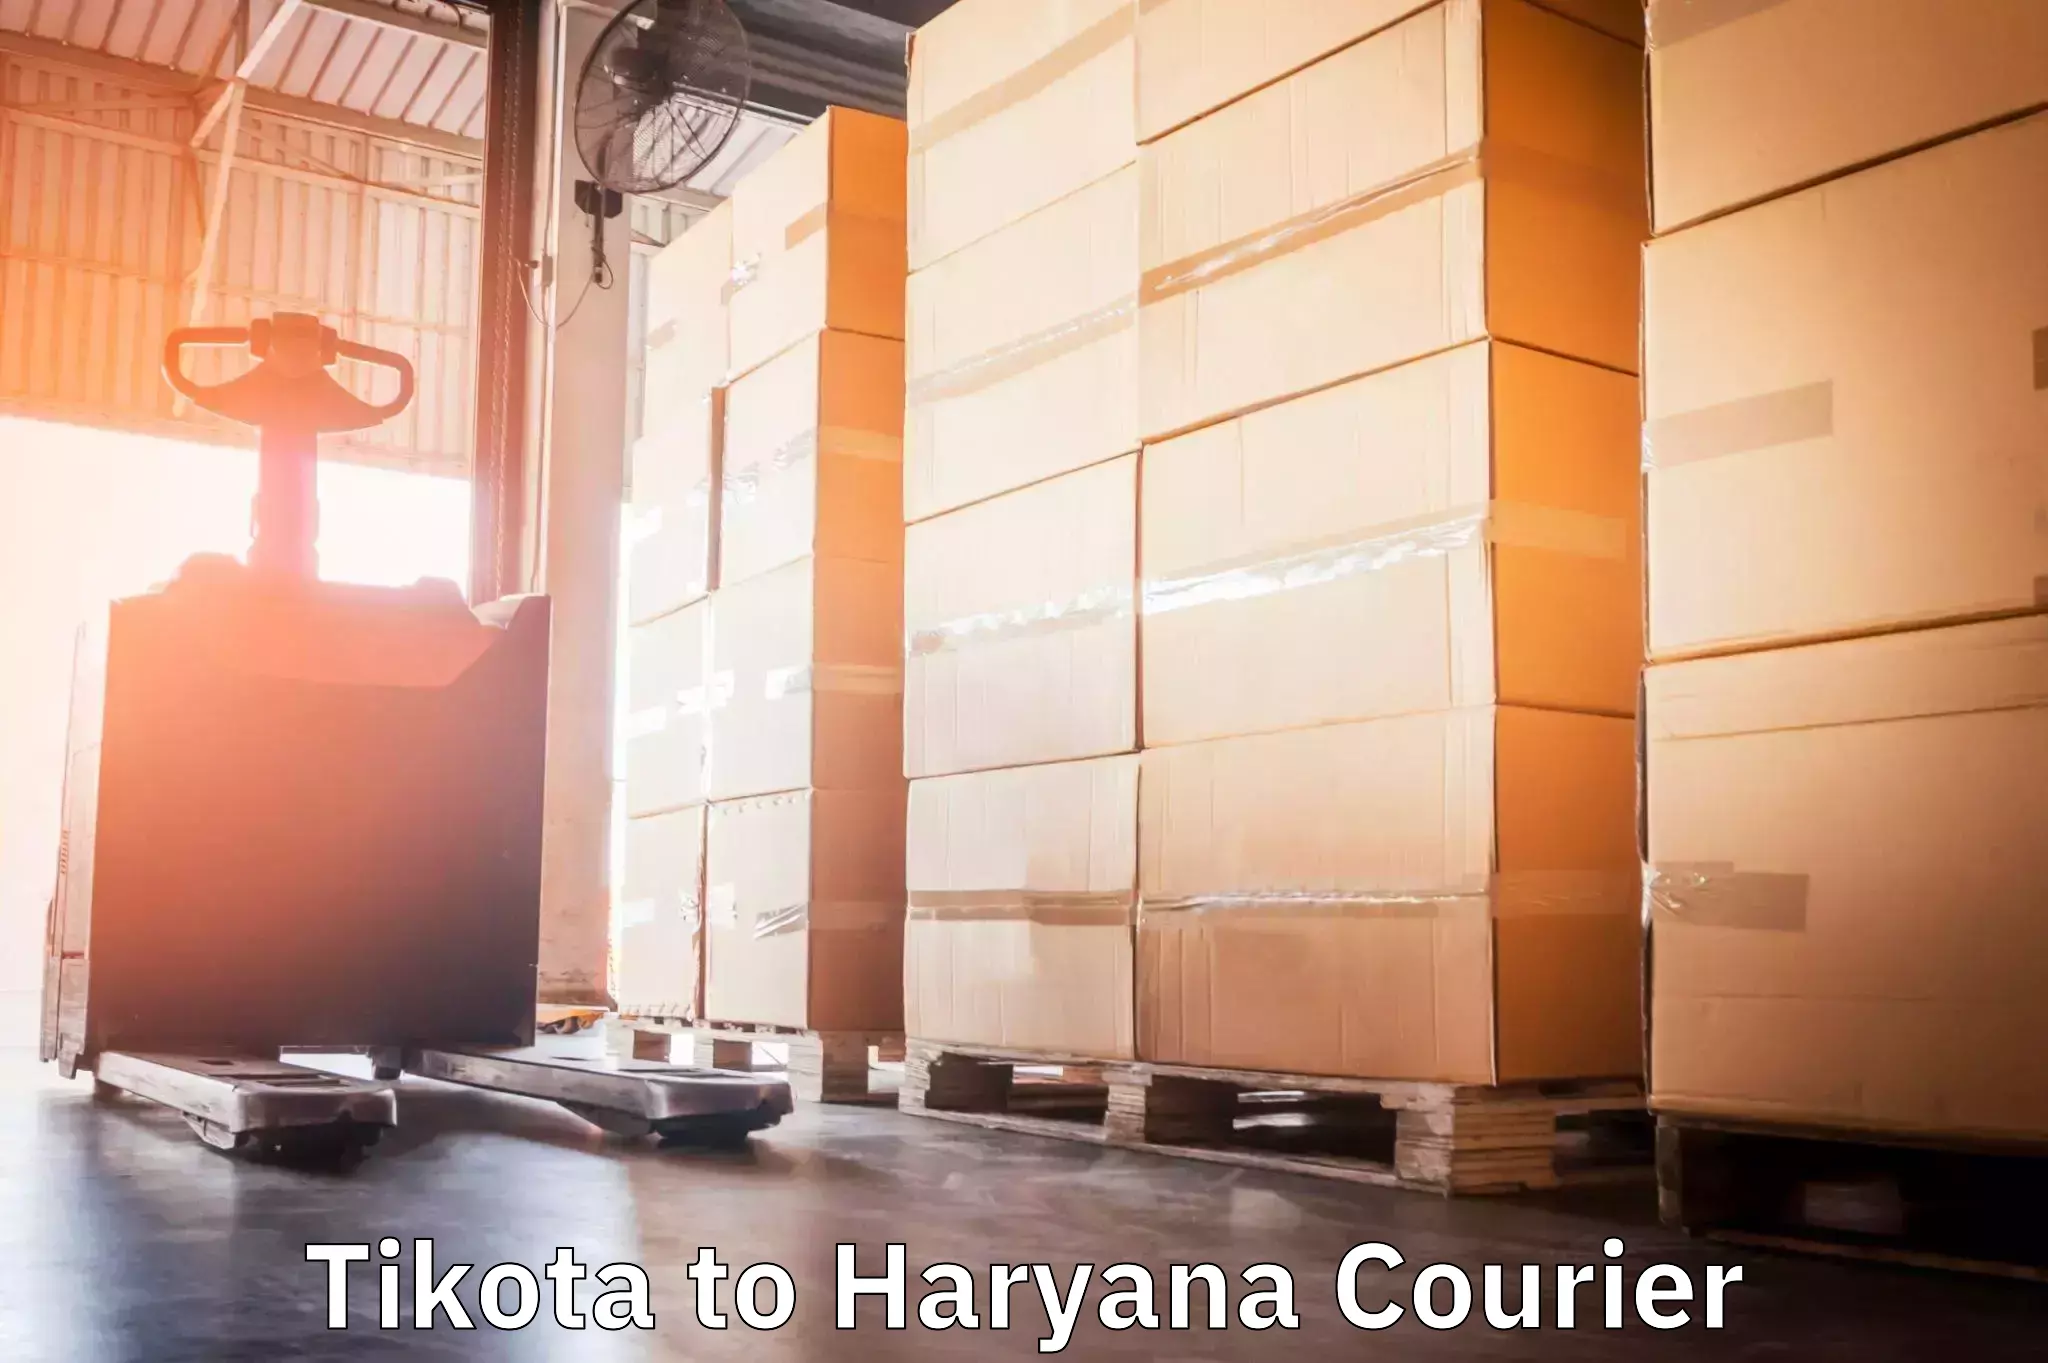 Parcel service for businesses Tikota to Haryana